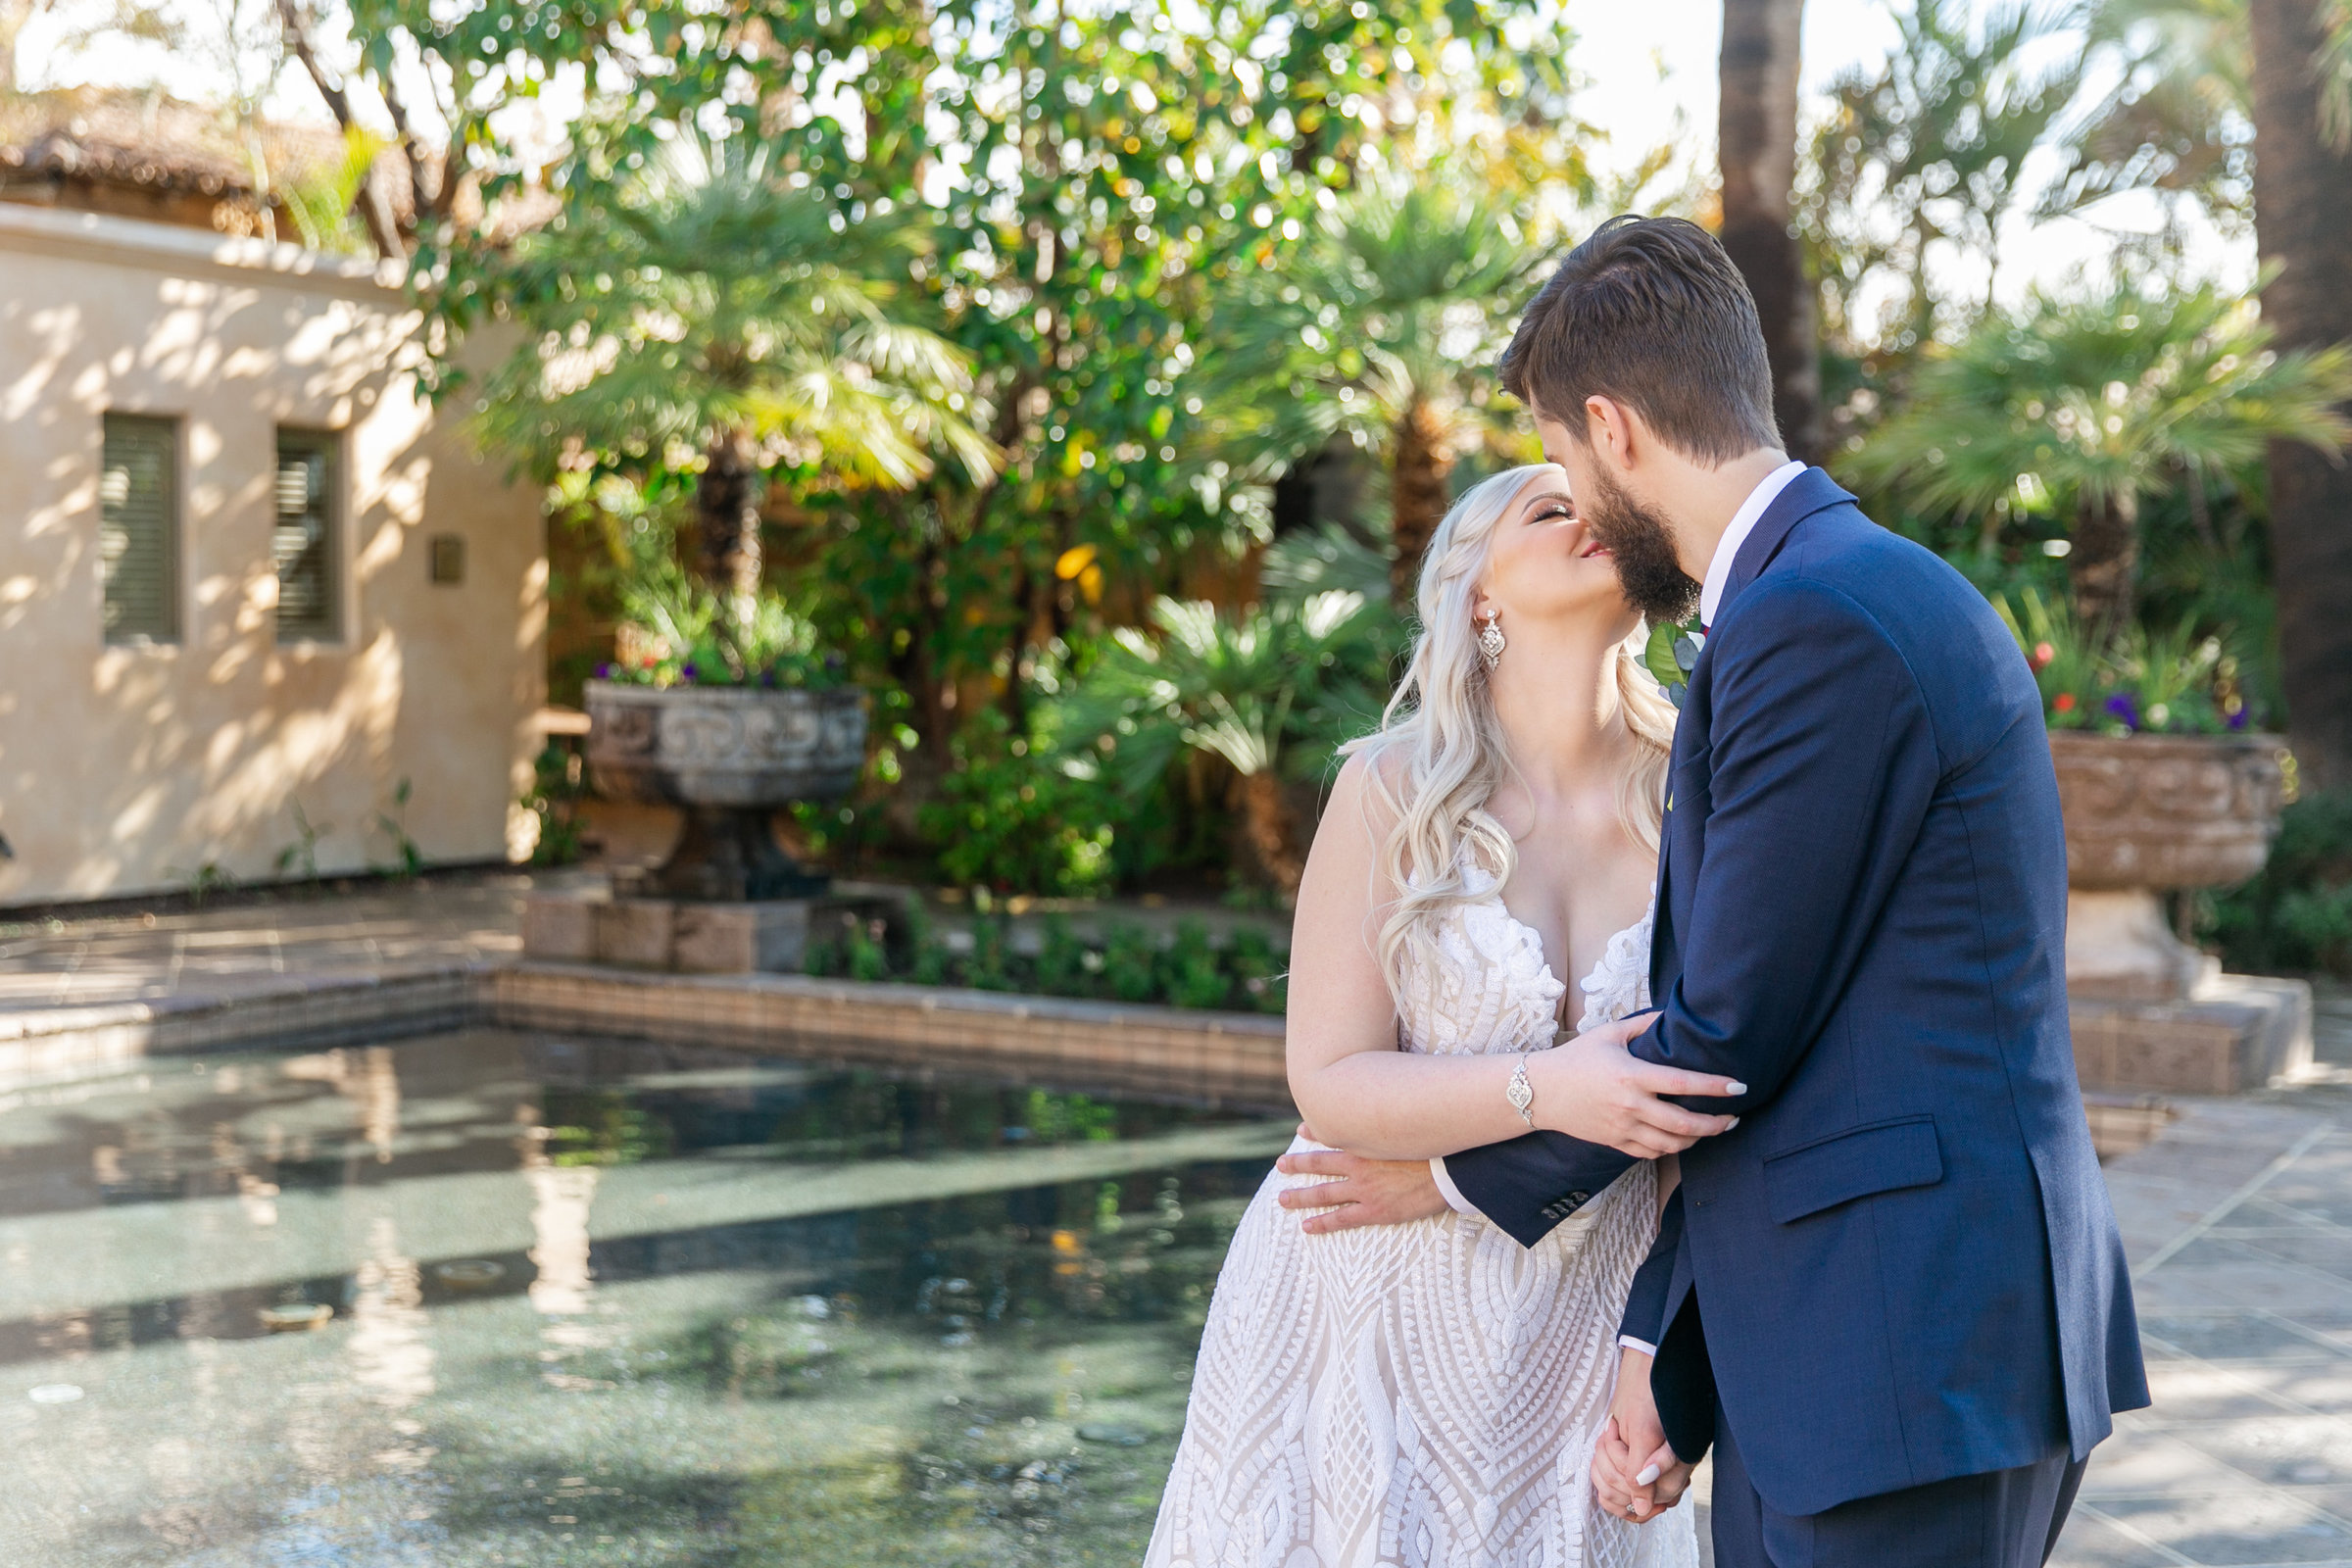 Karlie Colleen Photography - The Royal Palms Wedding - Some Like It Classic - Alex & Sam-143